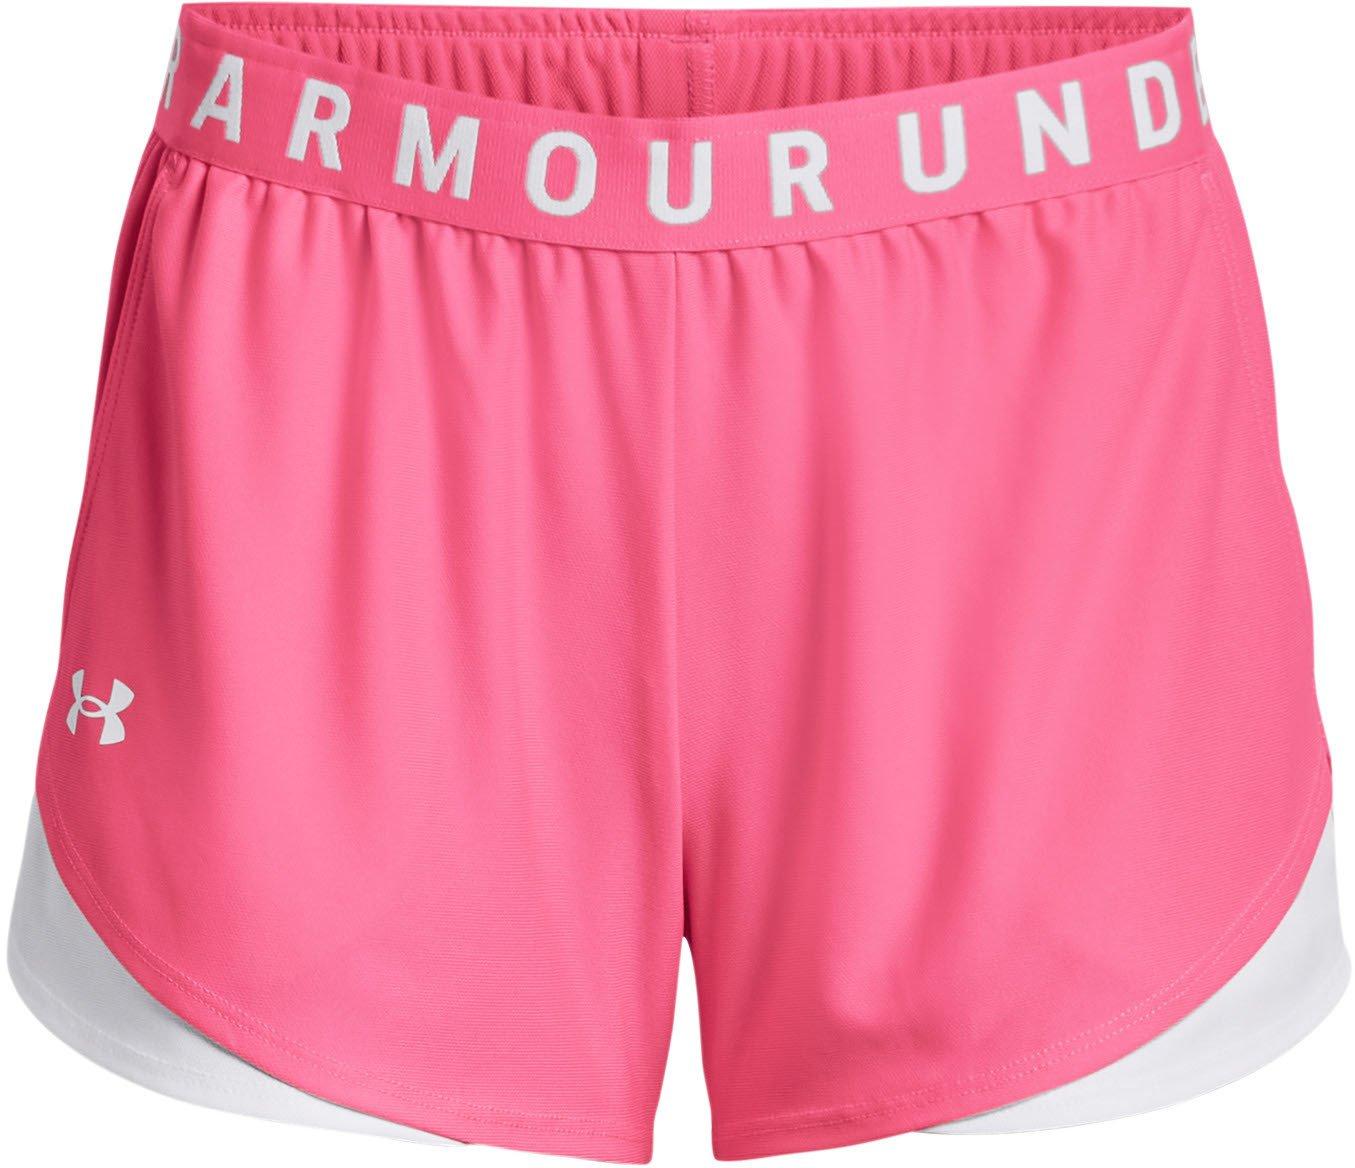 Under Armour Play Up Shorts 3.0 XS